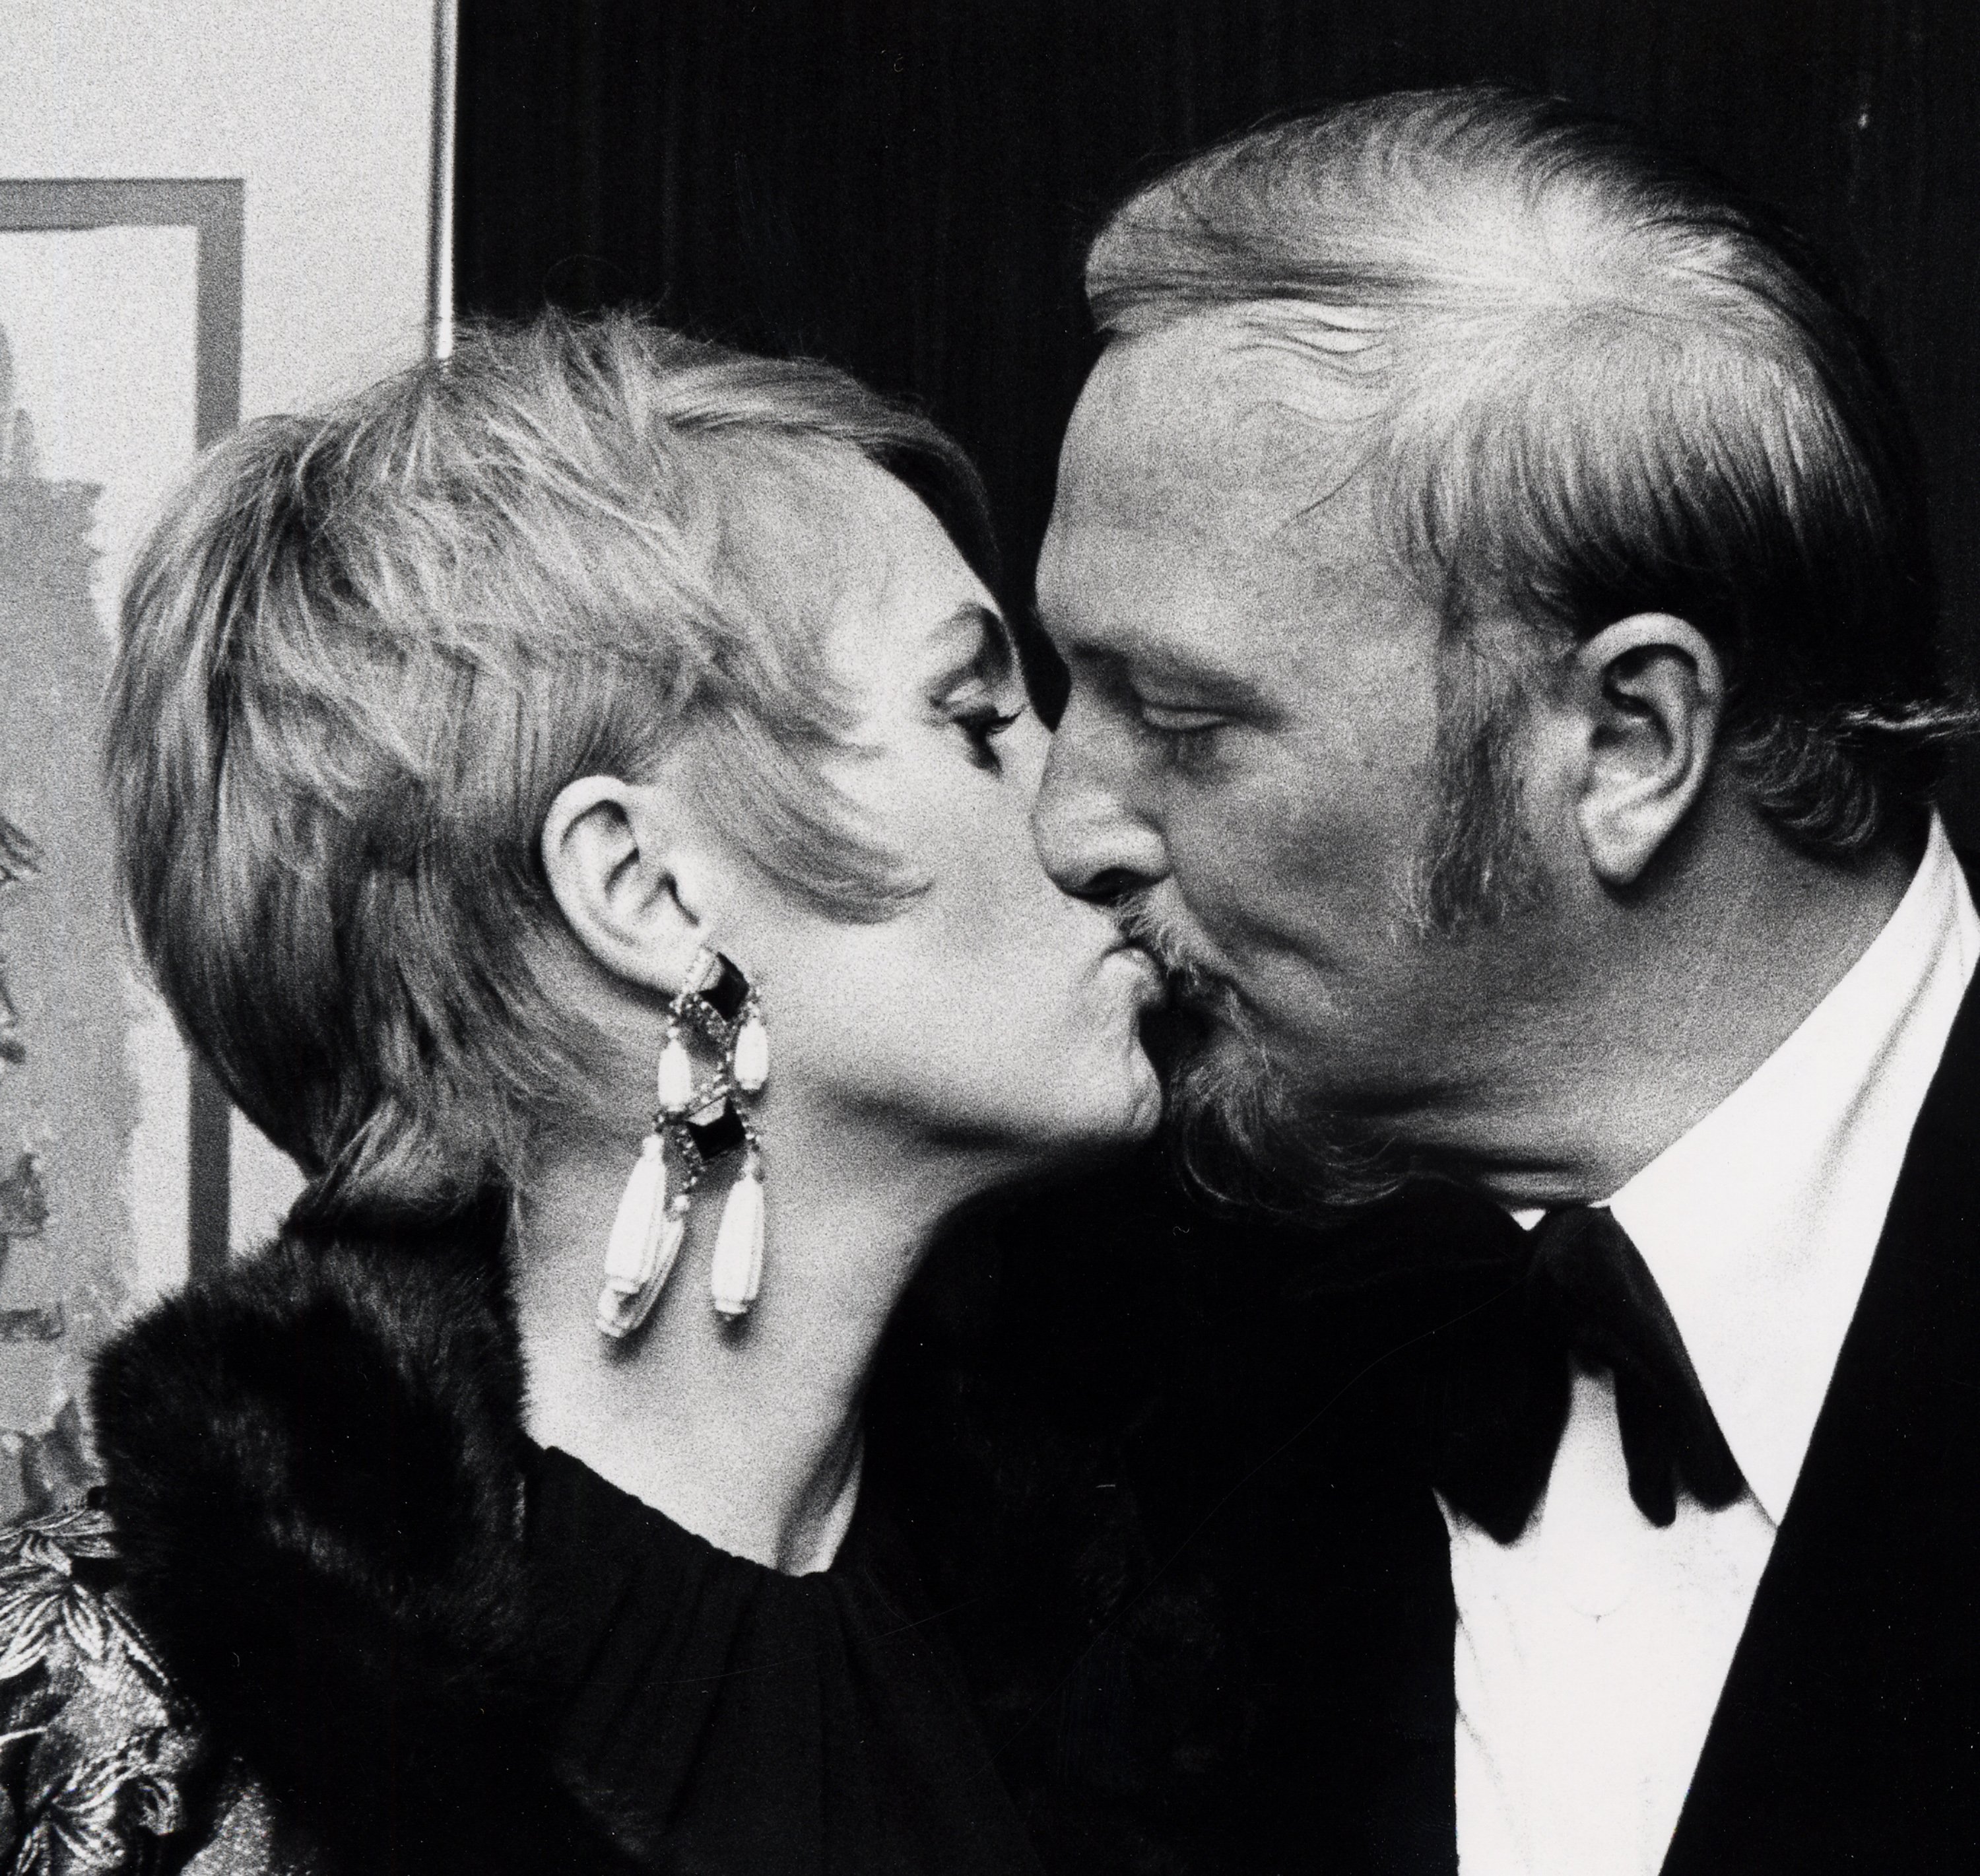 Shirley Jones and Jack Cassidy during "A Musical Tribute to Stephen Sondheim" in New York City, on March 11, 1973. | Source: Ron Galella/Ron Galella Collection/Getty Images